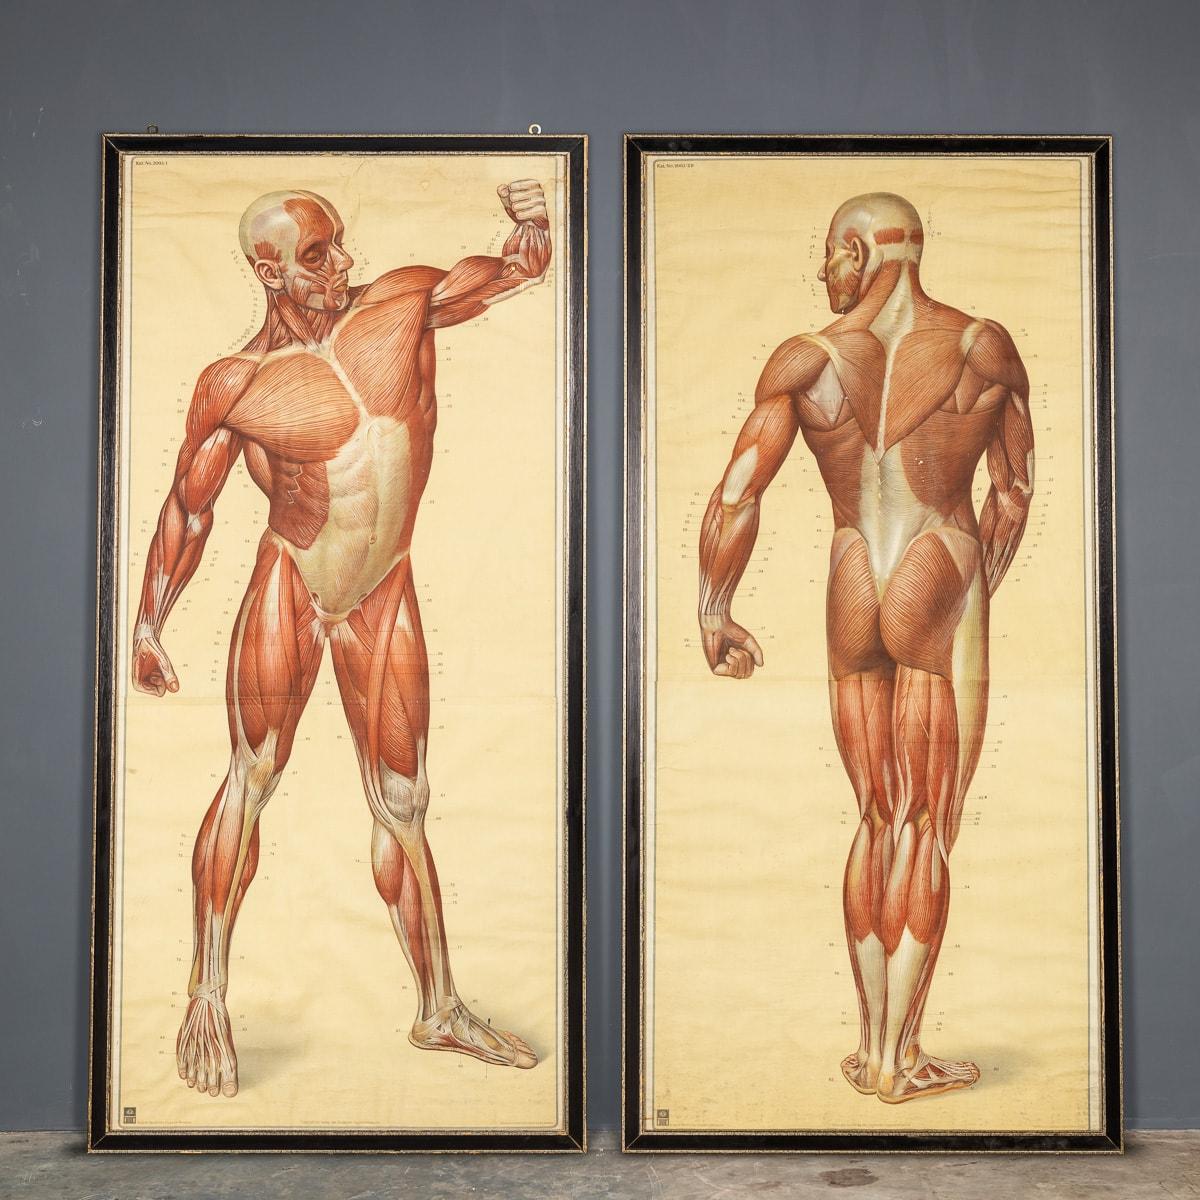 This pair of Anatomical pictures are part of a series called the Naturalien and Lehrmittel Anatomies and Biologie, by Tanck & Wegelin and considered to be the most accurate anatomical charts of their time. This pair of muscular structure charts were